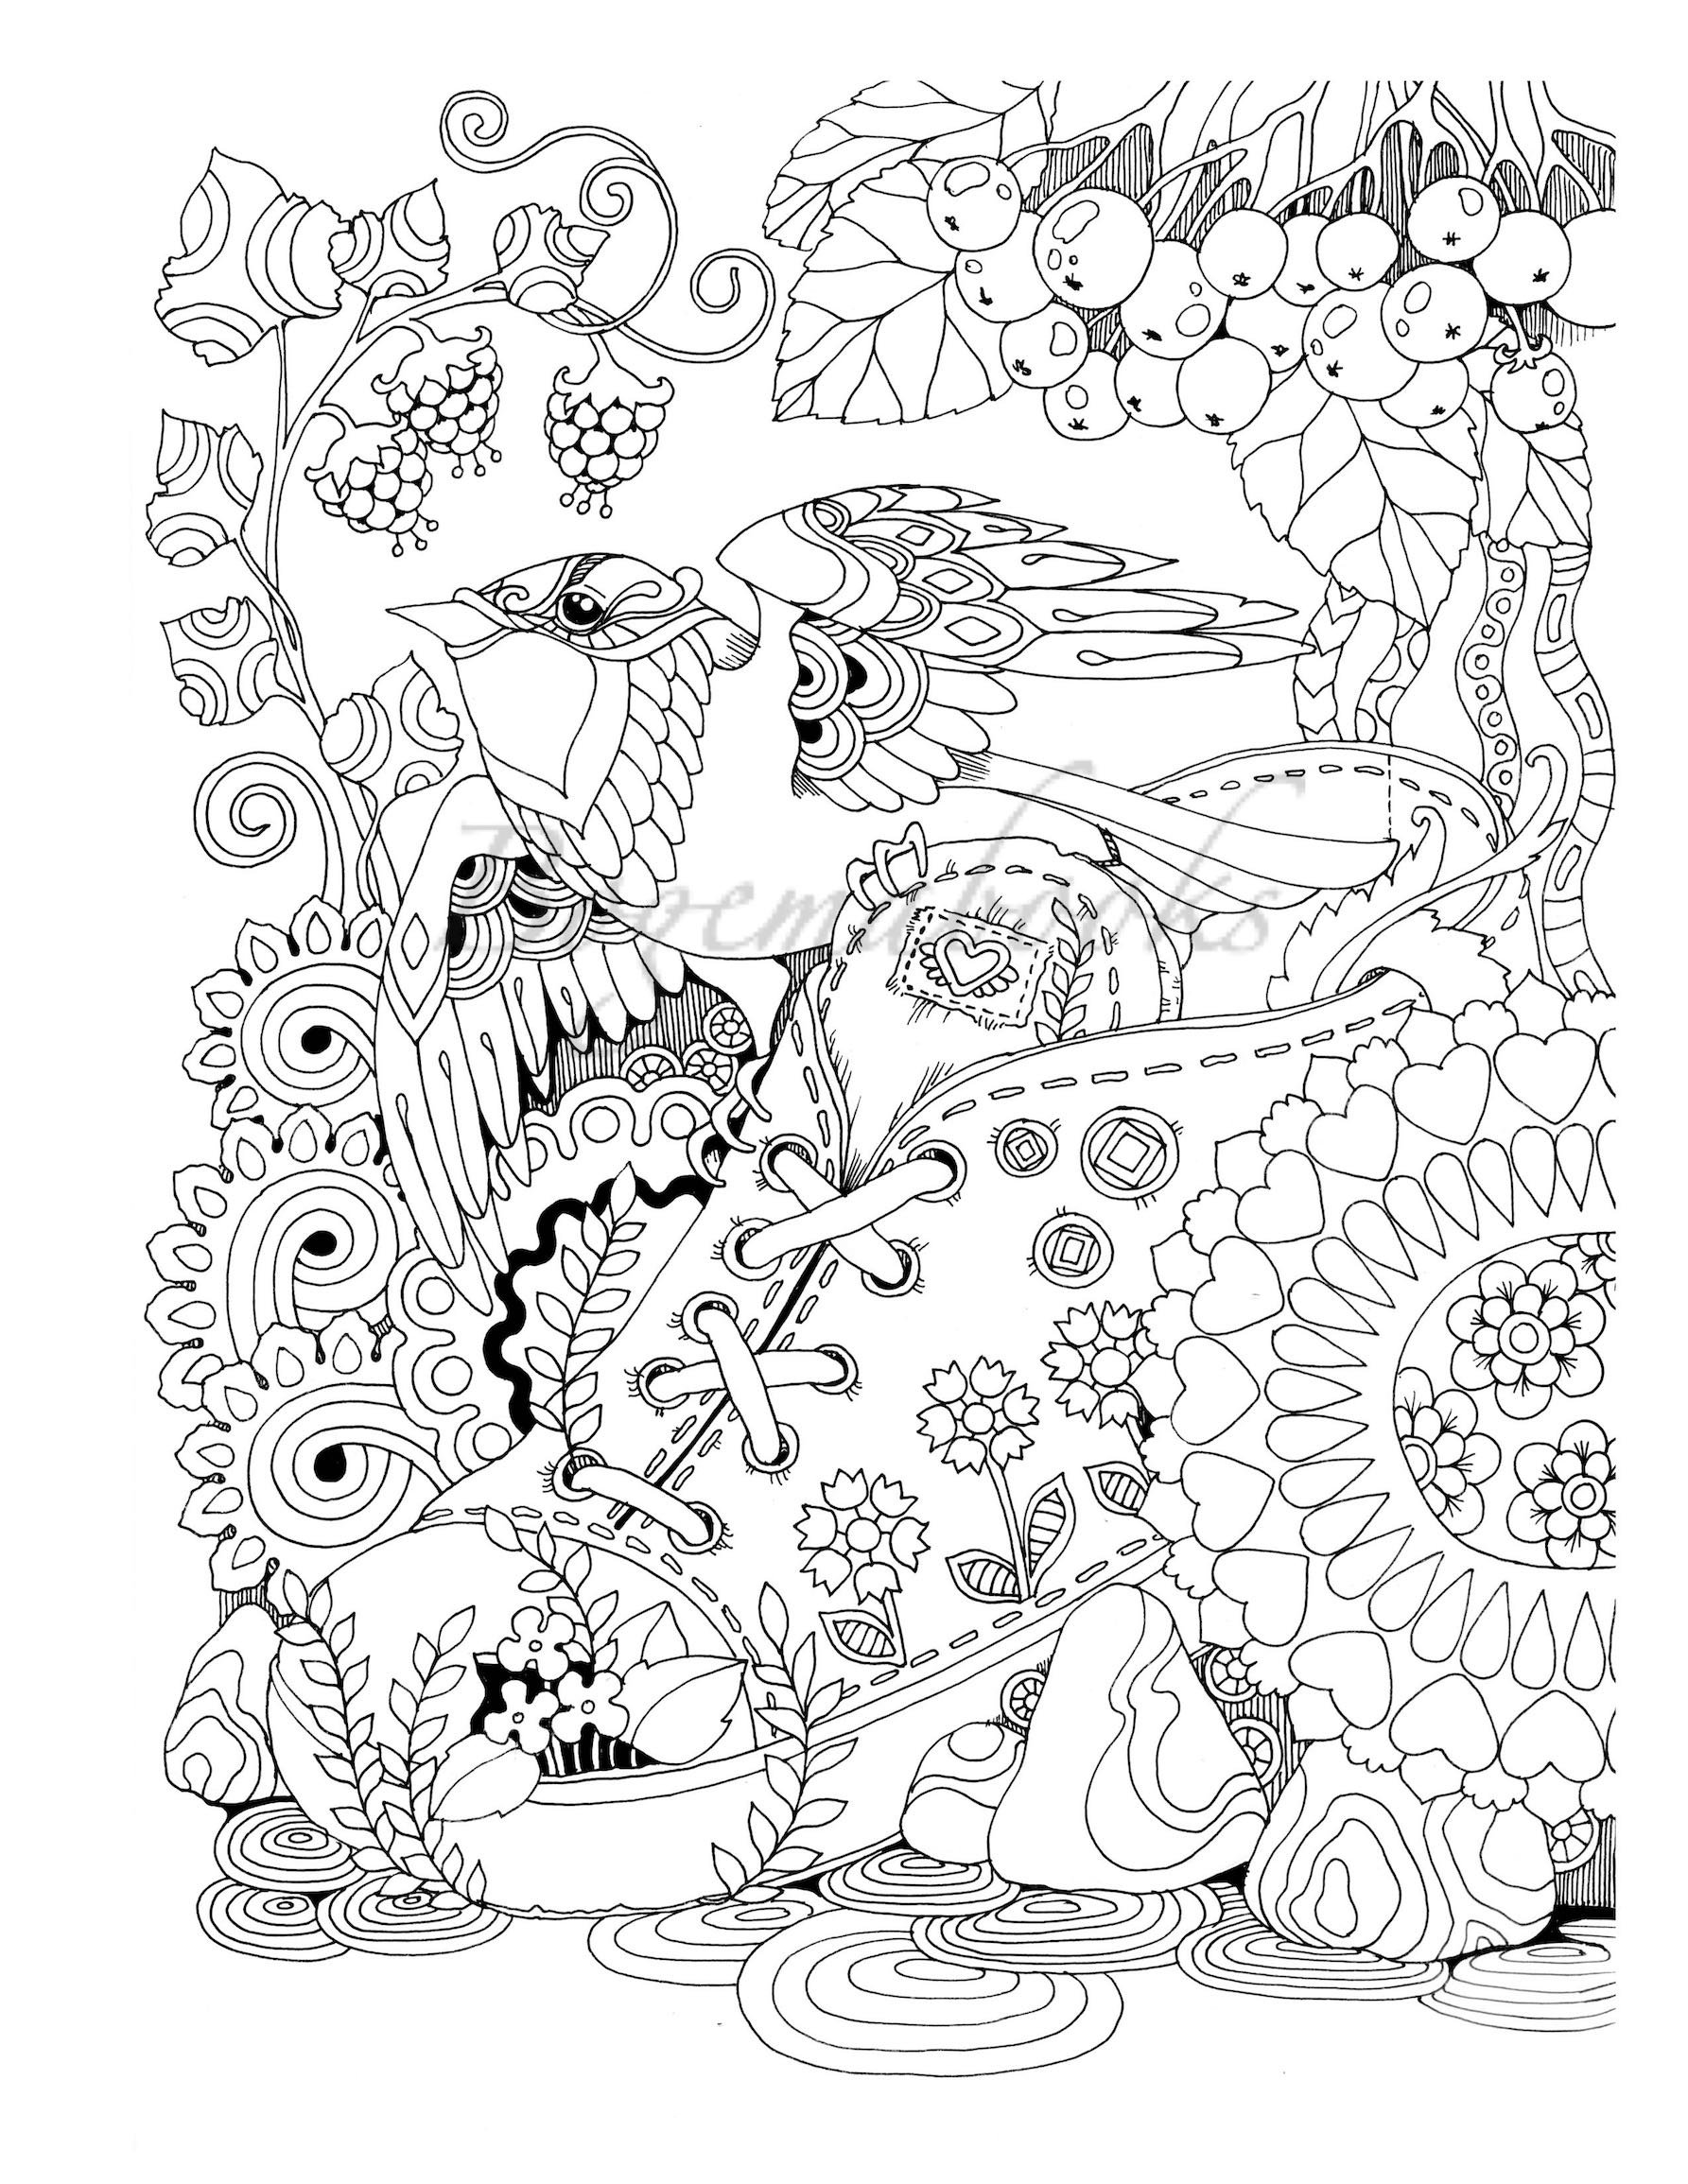 RYVE Coloring Book for Adults Relaxation - Adult Coloring Book for Anxiety  and Depression - Stress Relief Coloring Book, Adult Coloring Book for